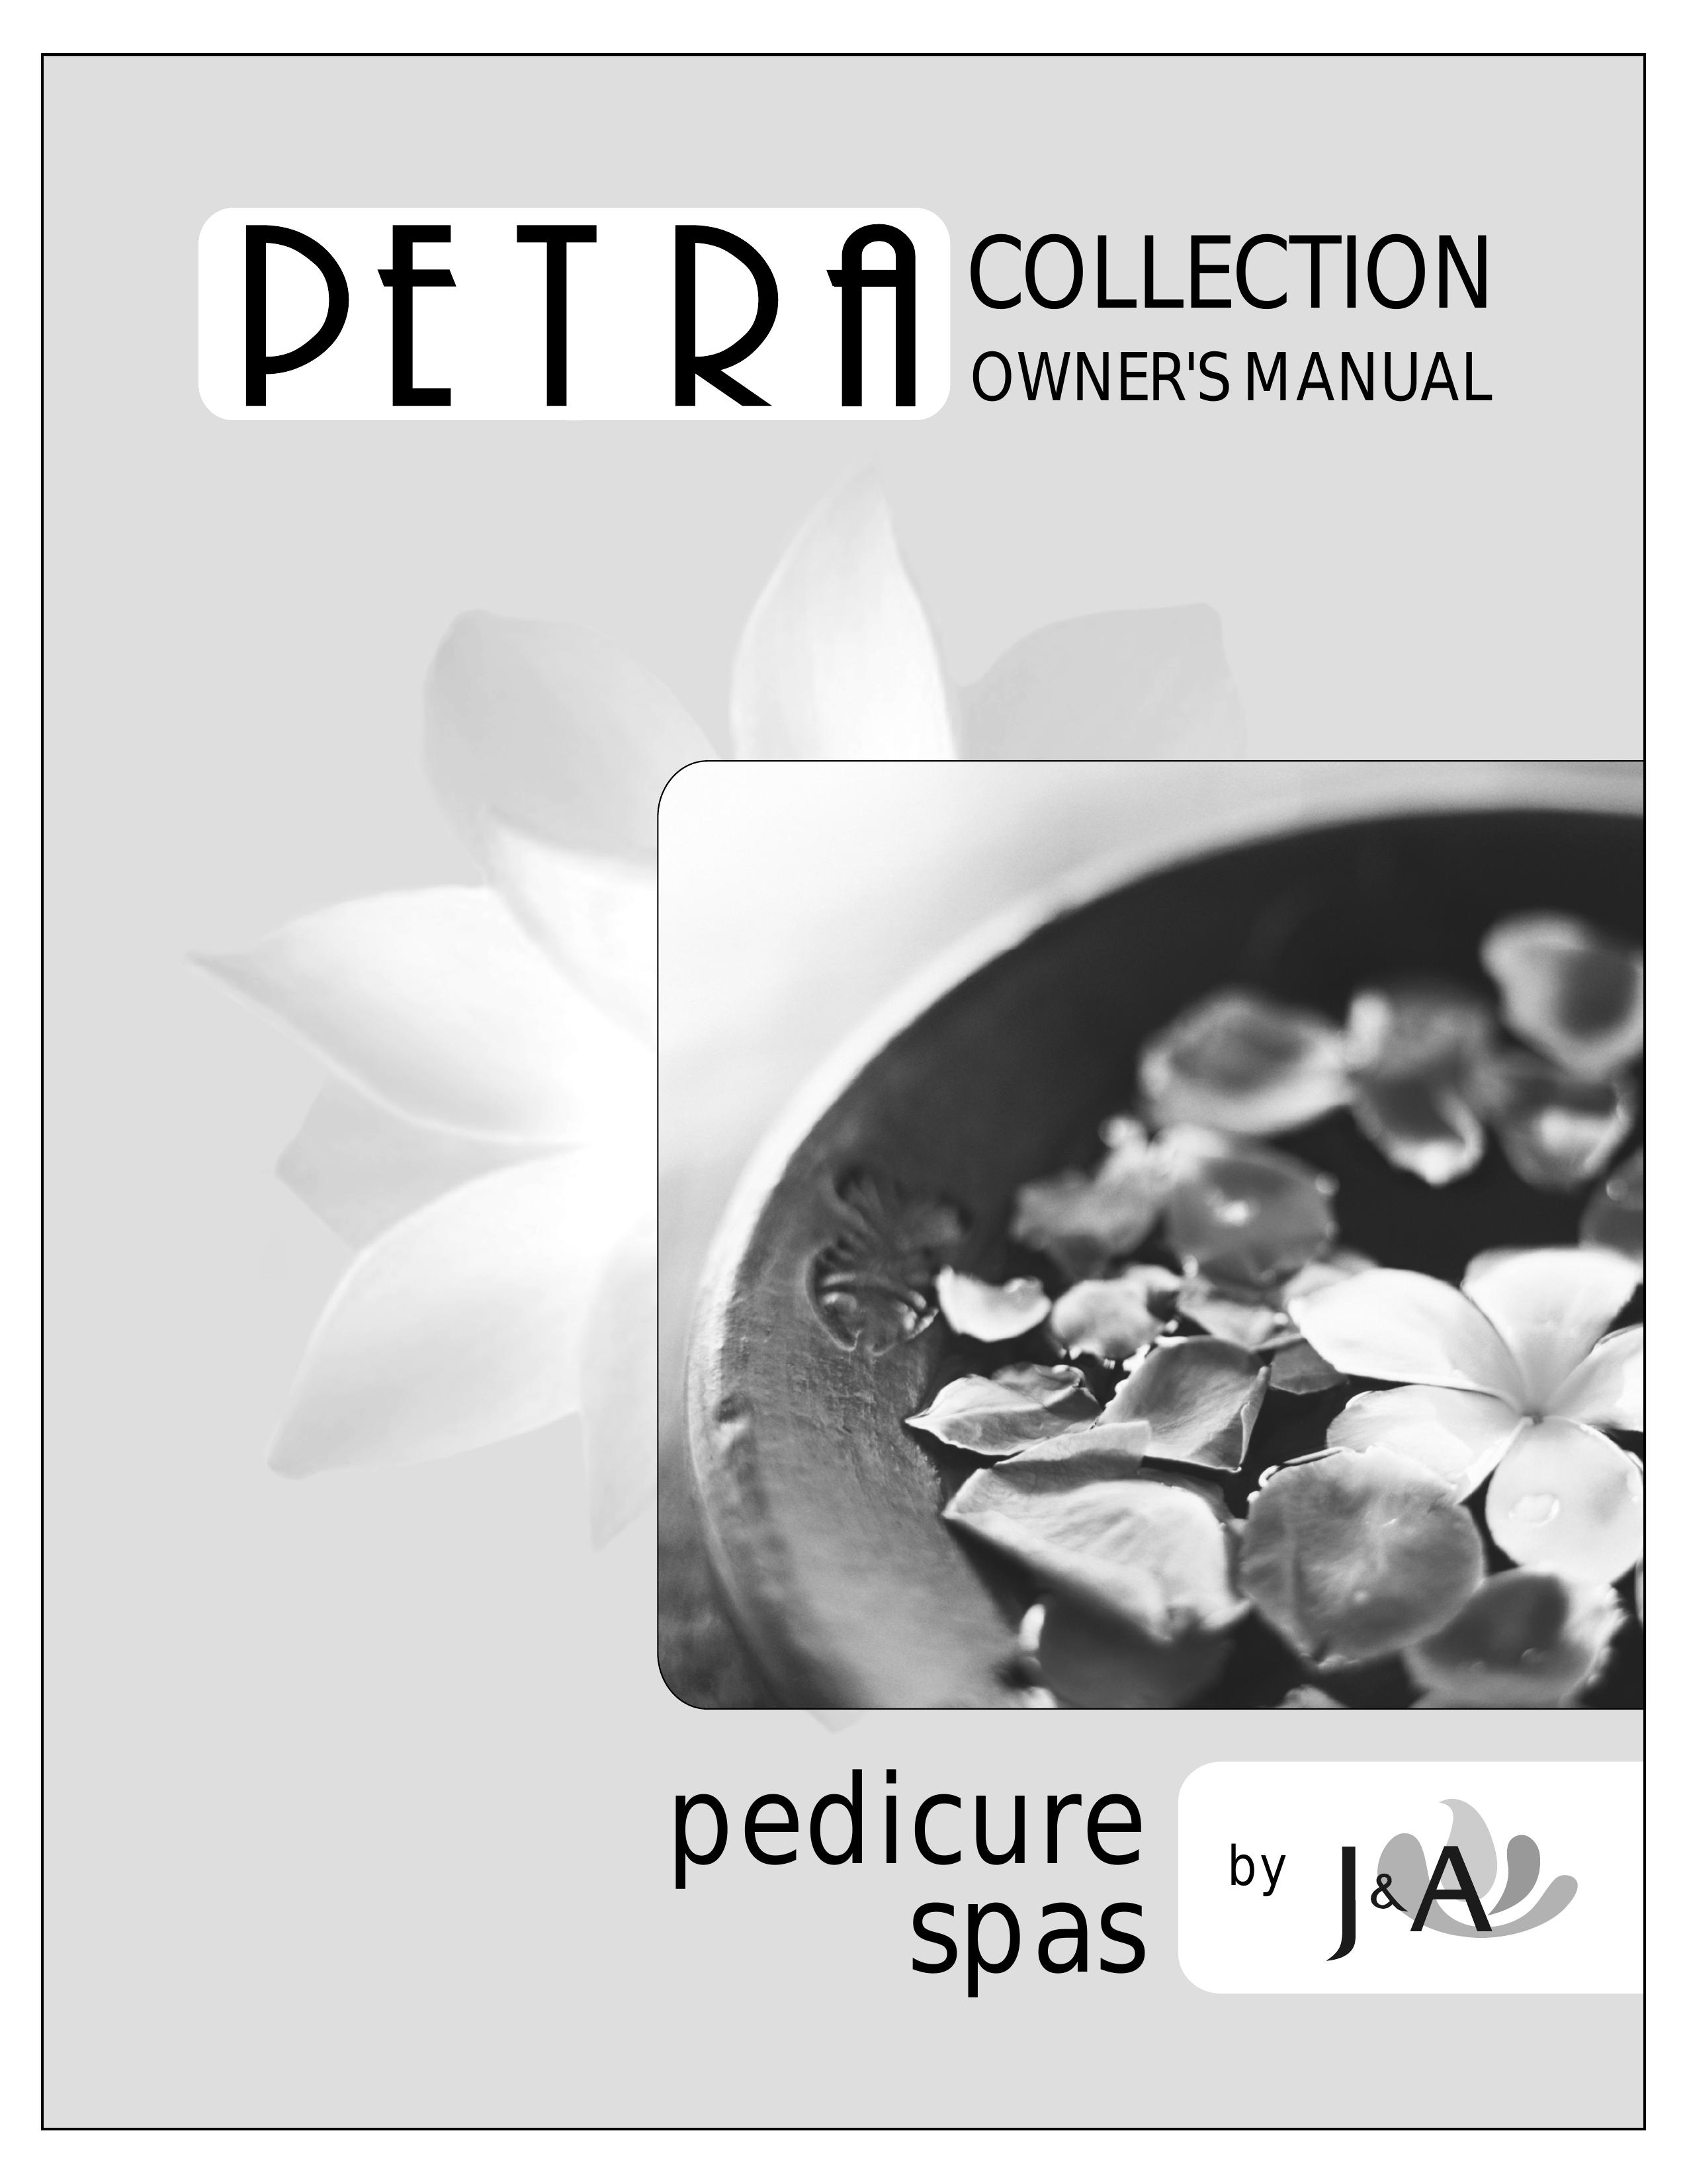 Whirlpool Petra Collection Pedicure Spa User Manual